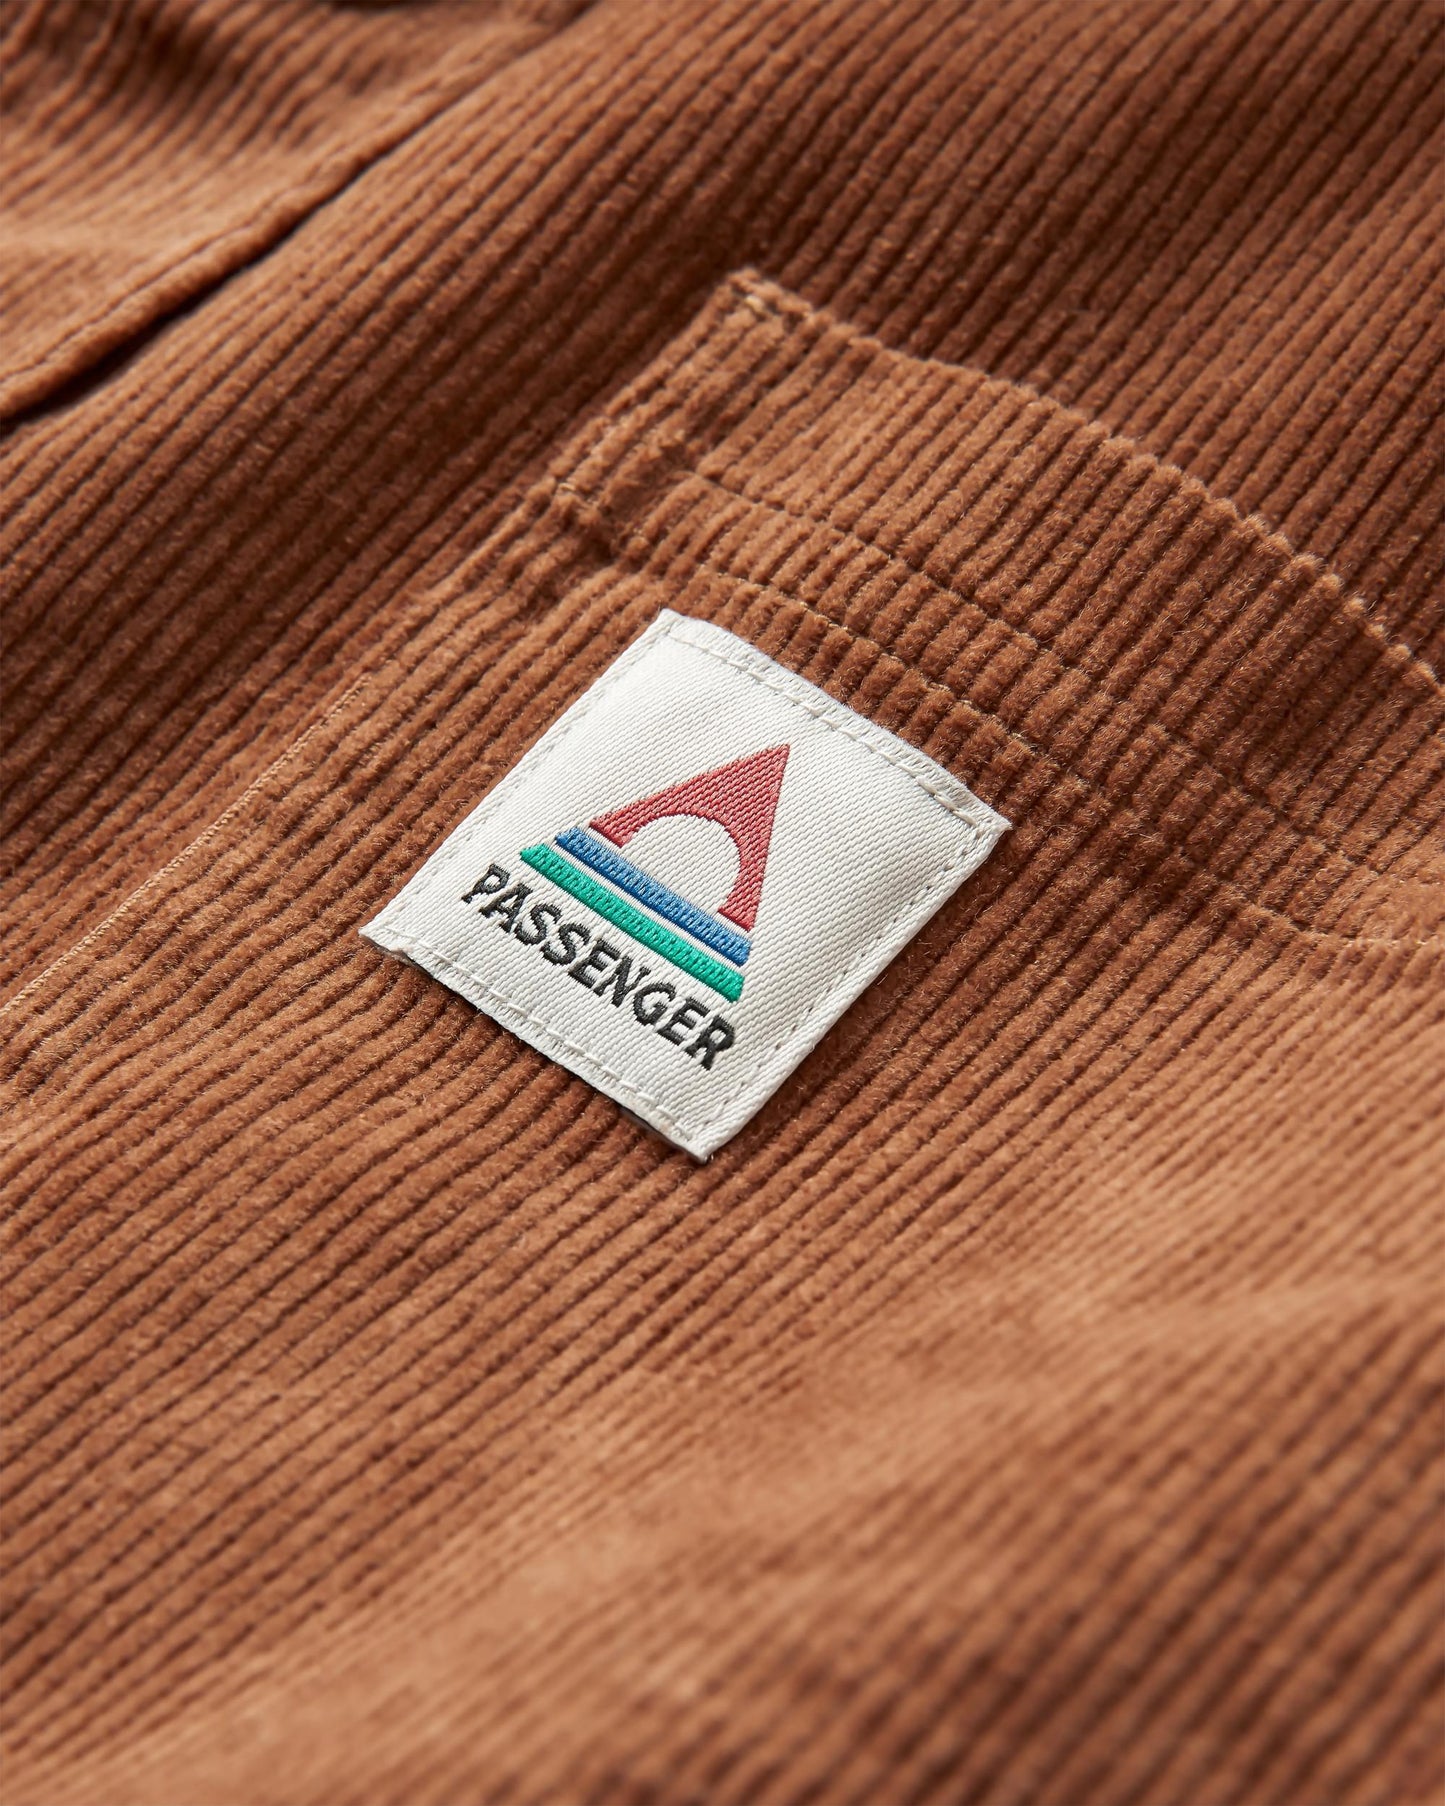 Backcountry Cord Shirt - Toffee